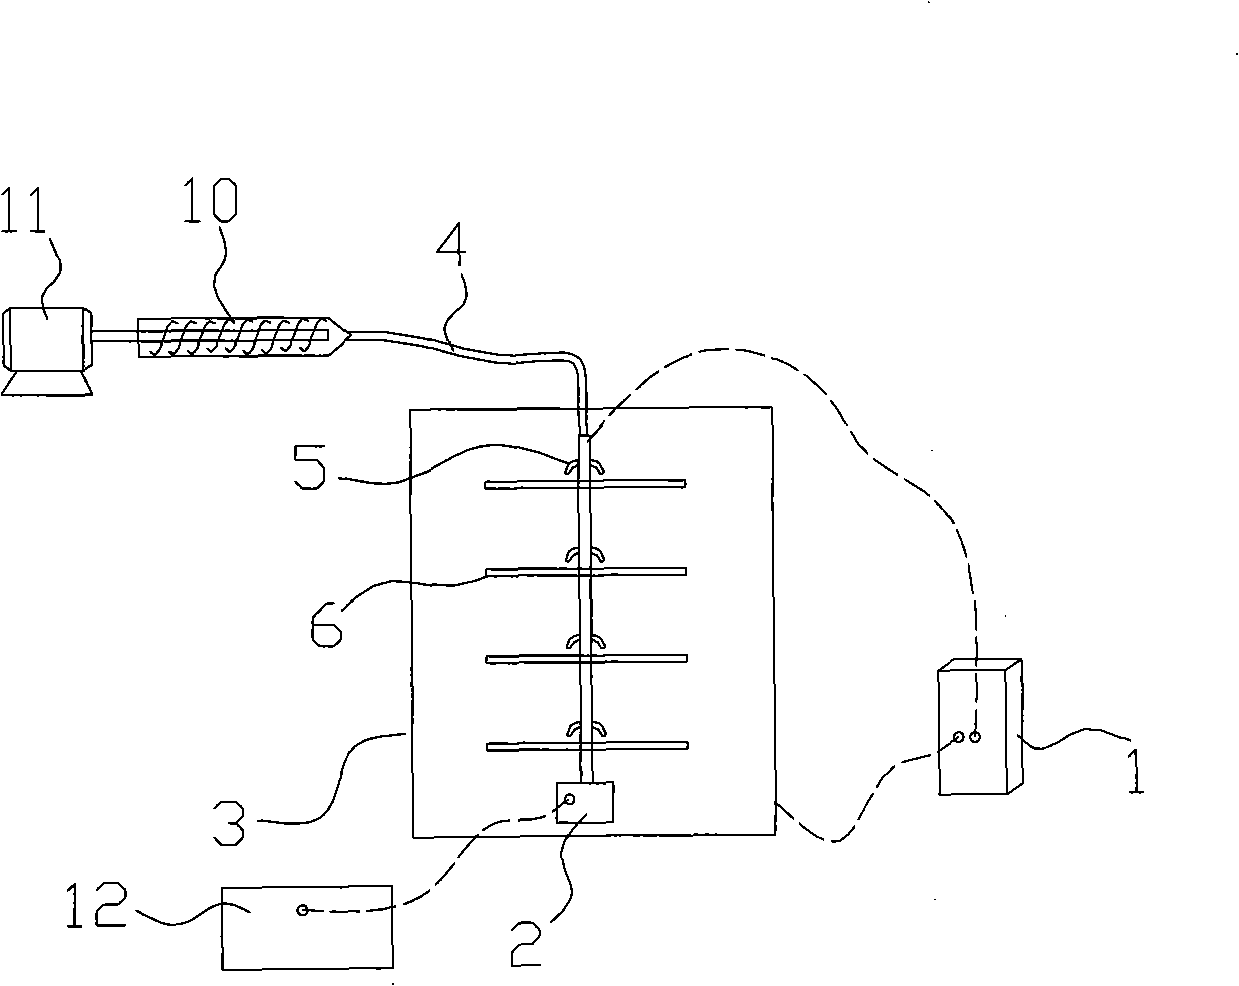 Non-nozzle continuous electrostatic spinning system